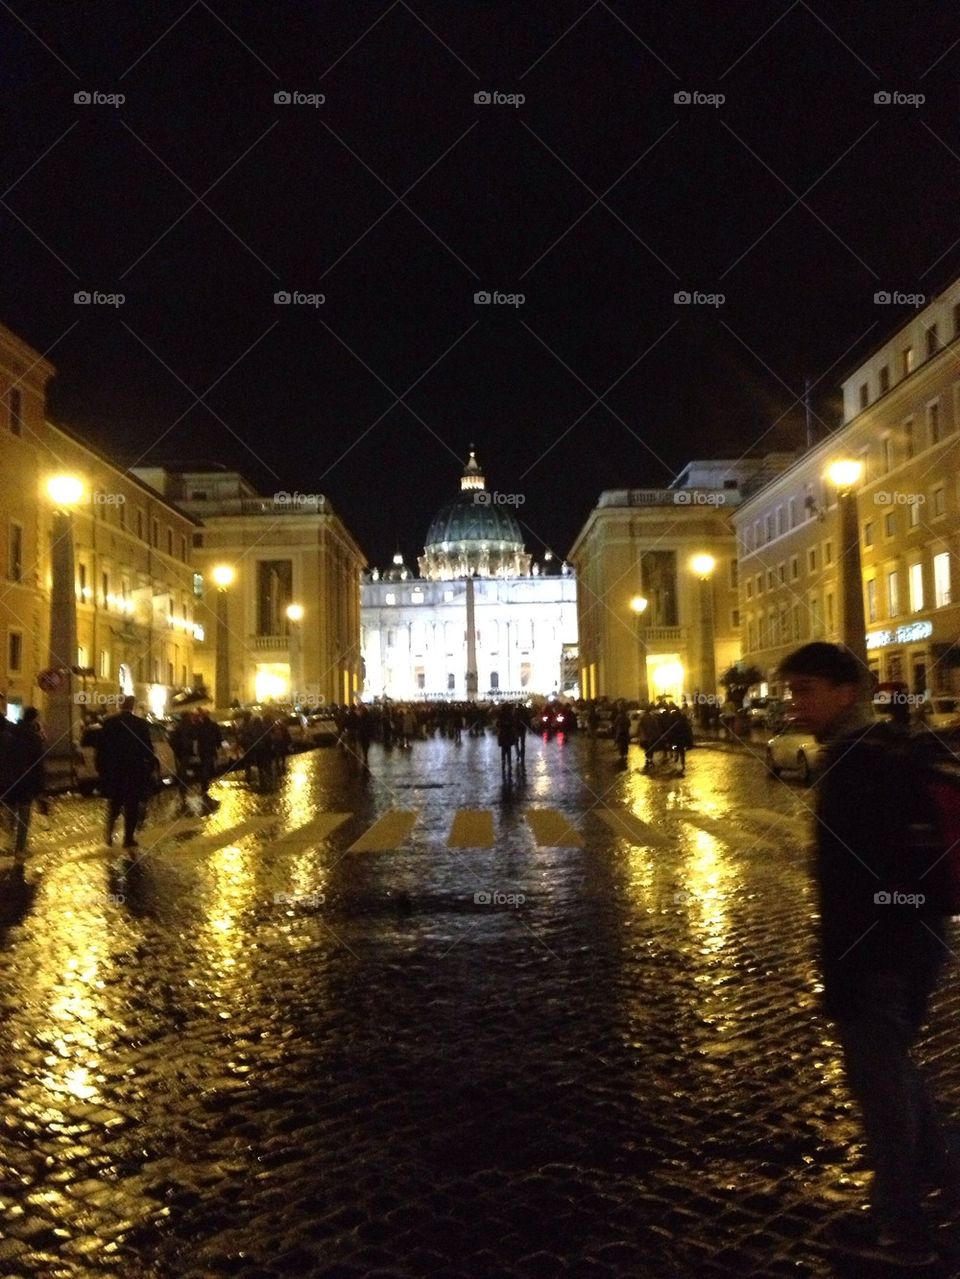 general travel st. peters basilica francis basilica by lorendipity